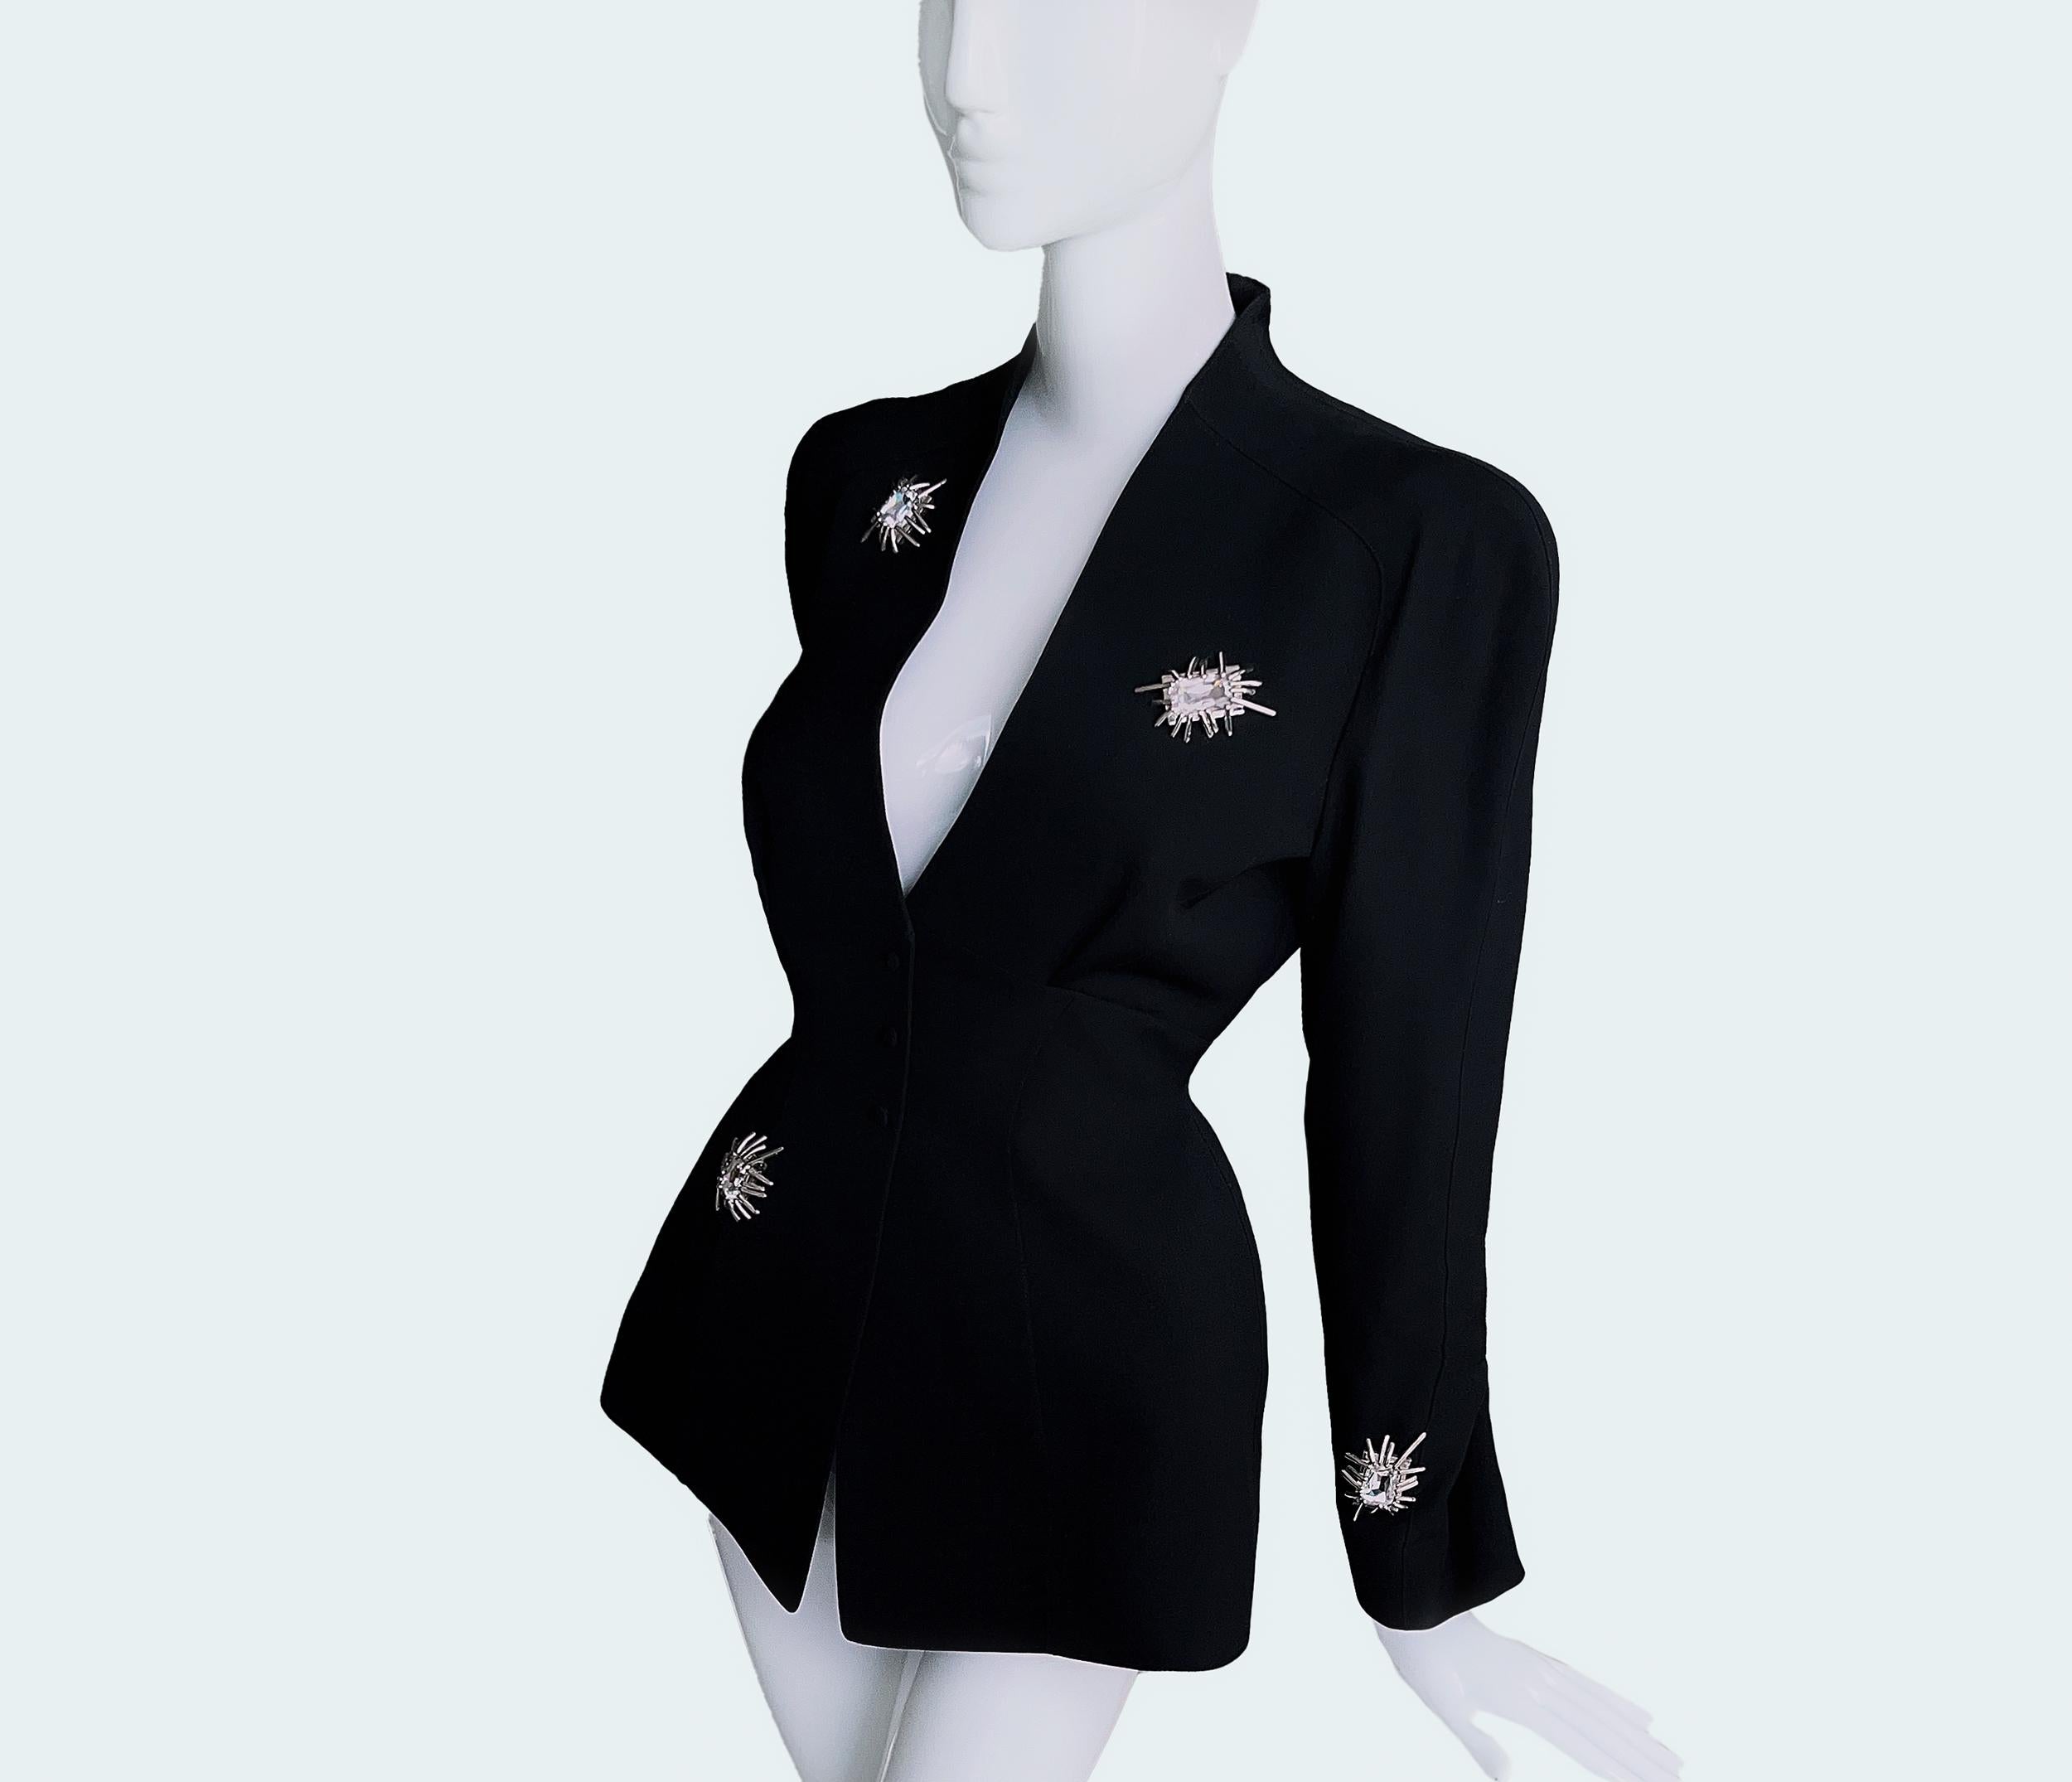 
Extremely rare stunning Thierry Mugler creation, assuming FW 1992 Collection.
Fabulously tailored jacket with fitted feminine sculptural shape and deep V-neck. Highlights are amazing big silver metal details with spider-like features and beautiful